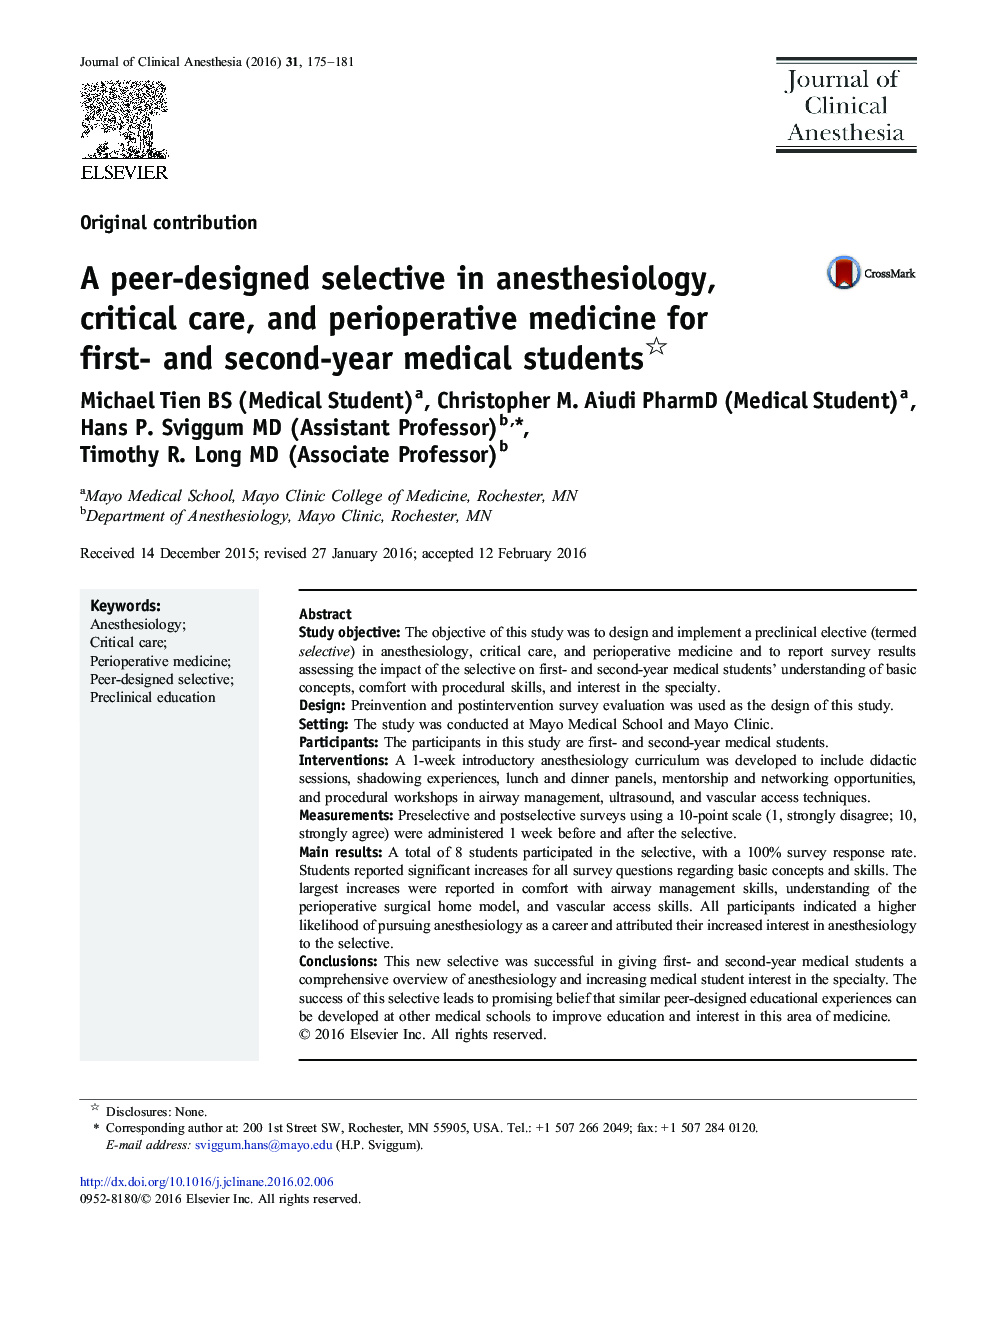 A peer-designed selective in anesthesiology, critical care, and perioperative medicine for first- and second-year medical students